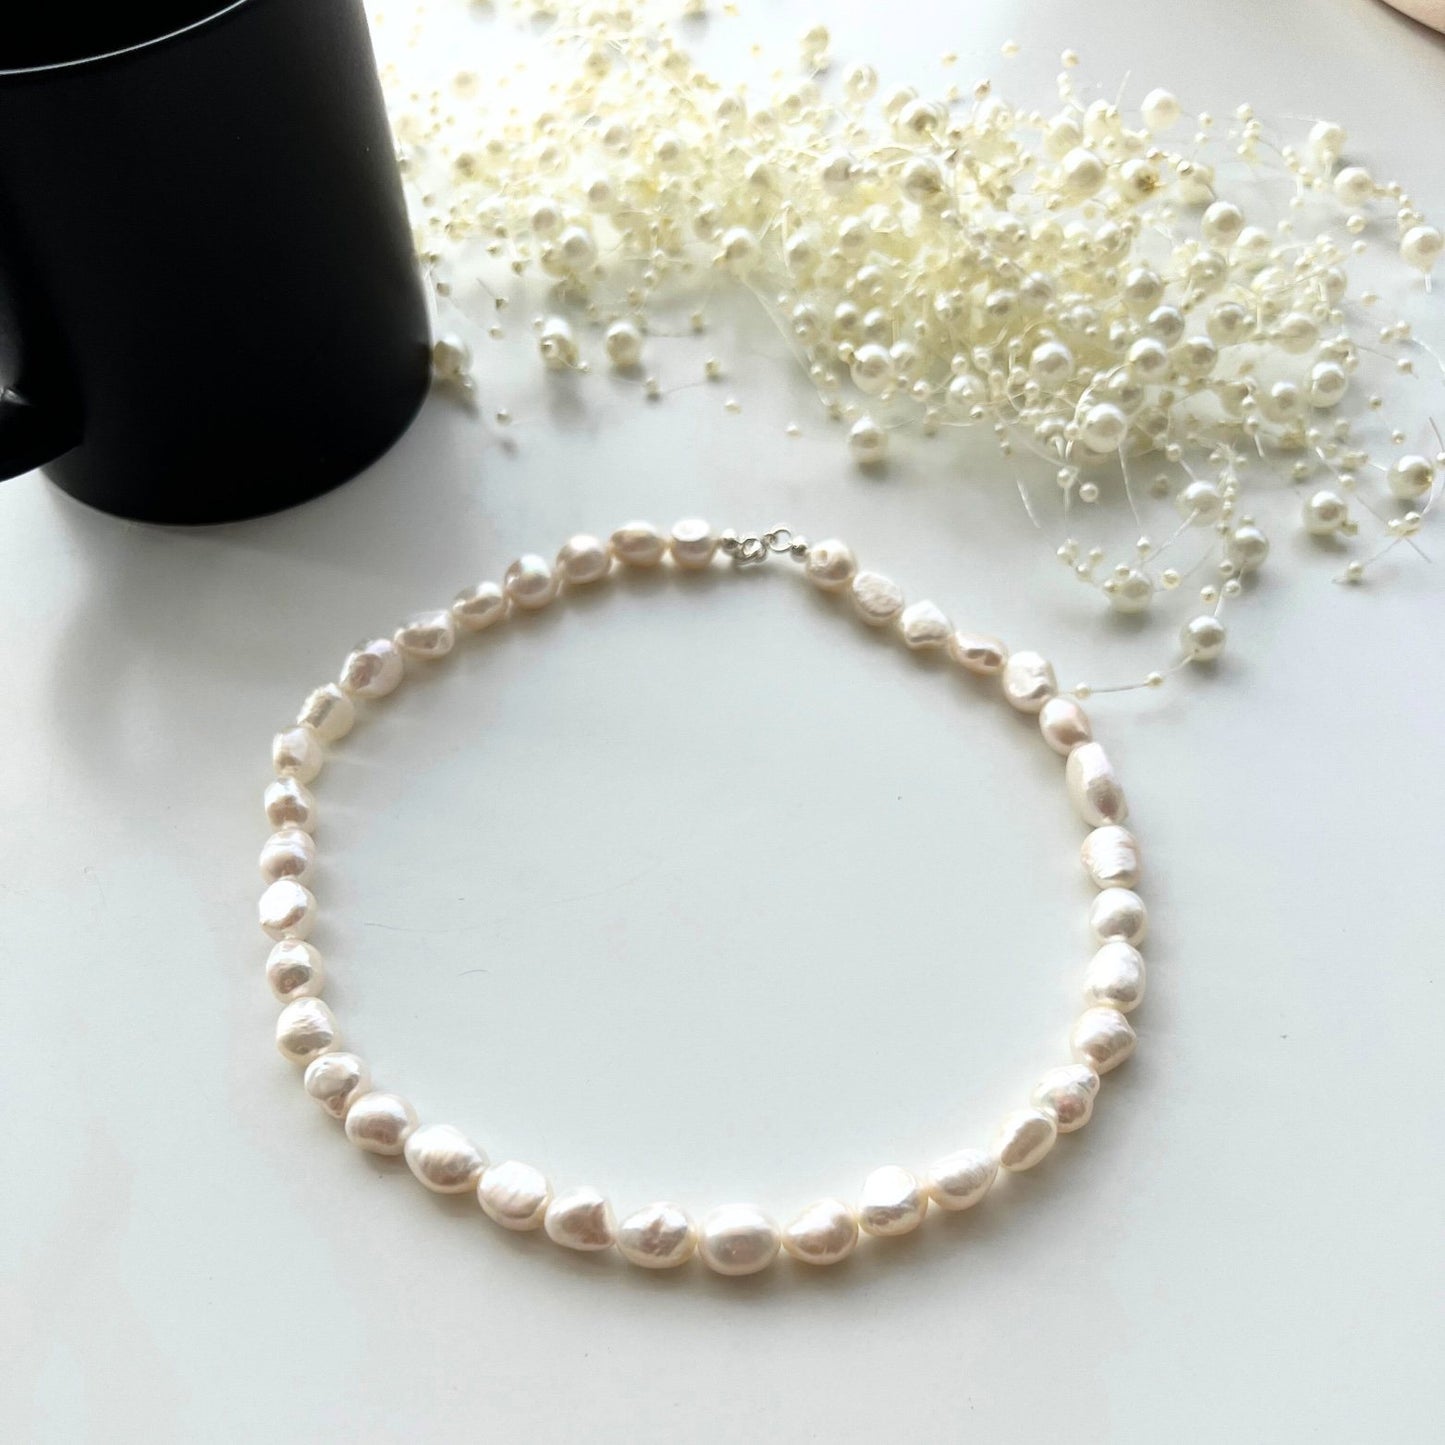 Sena Chunky Freshwater Pearl Necklace on background with cup- KORYANGS Brand